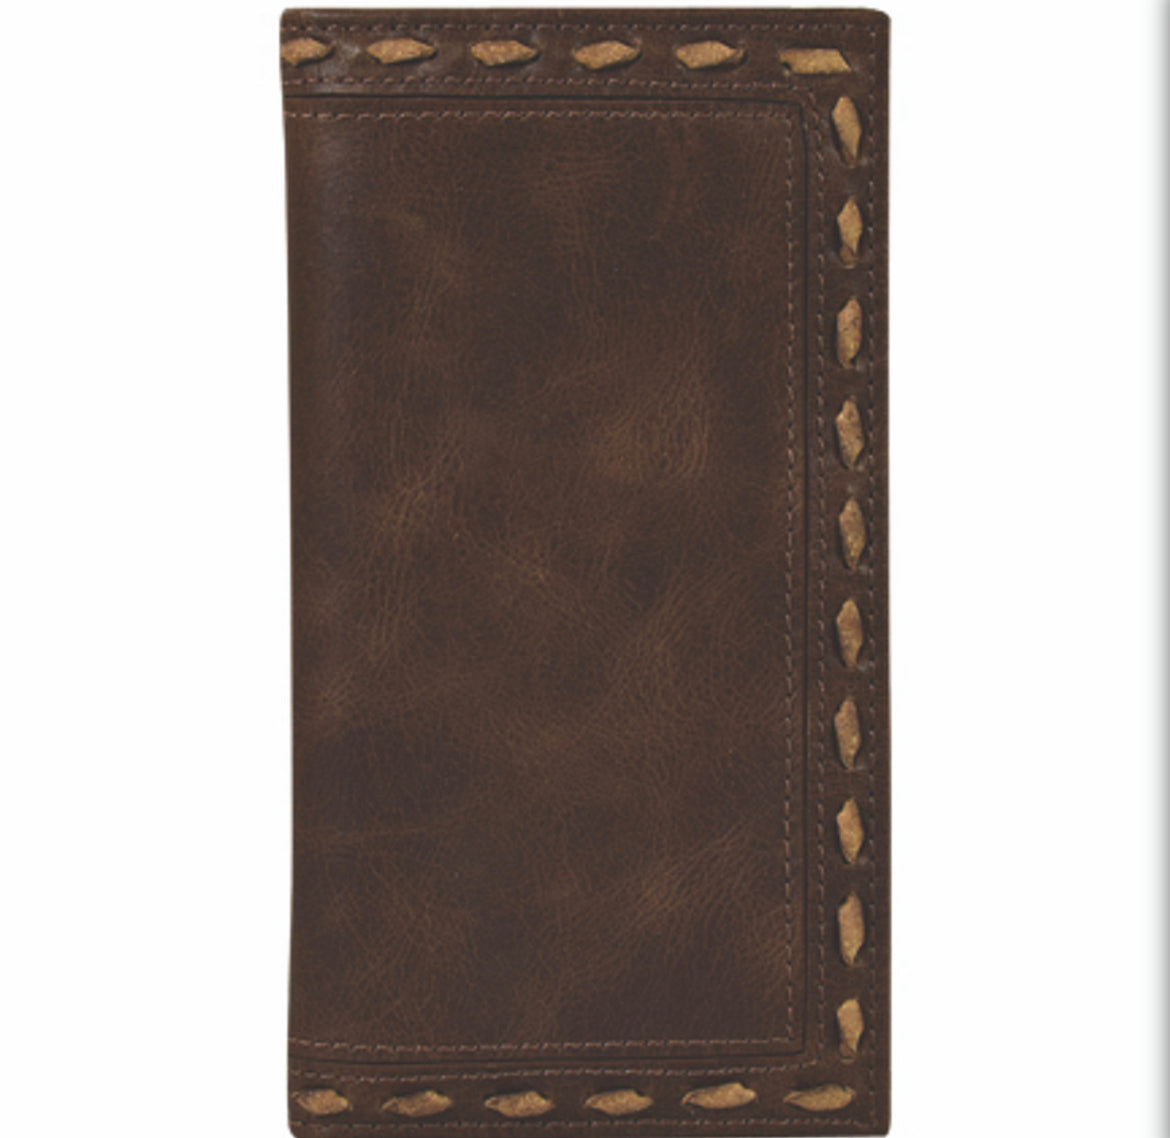 Justin Rodeo Whip Stitch Wallet